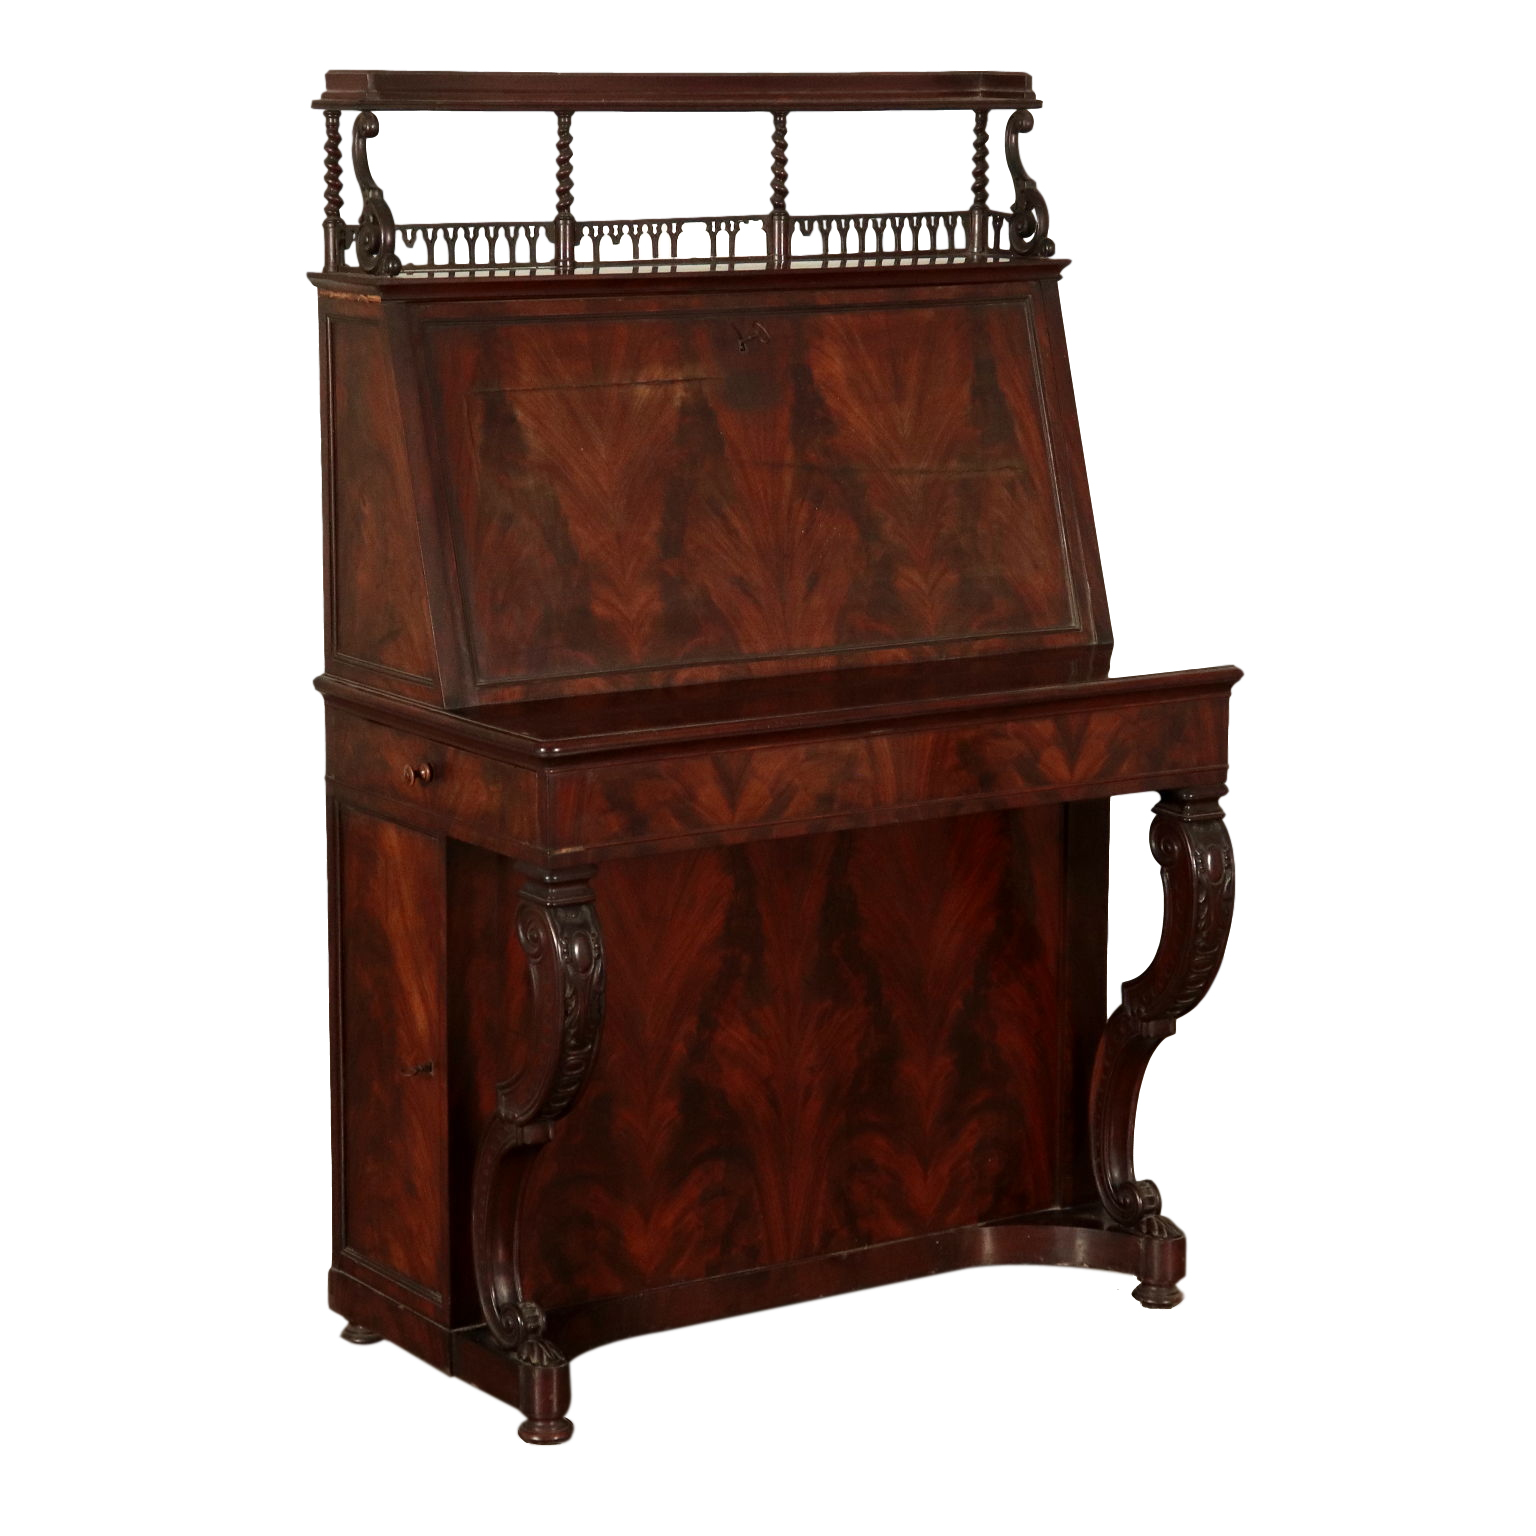 Writing Desk With Drop Leaf Maple Mahogany France Mid 1800s